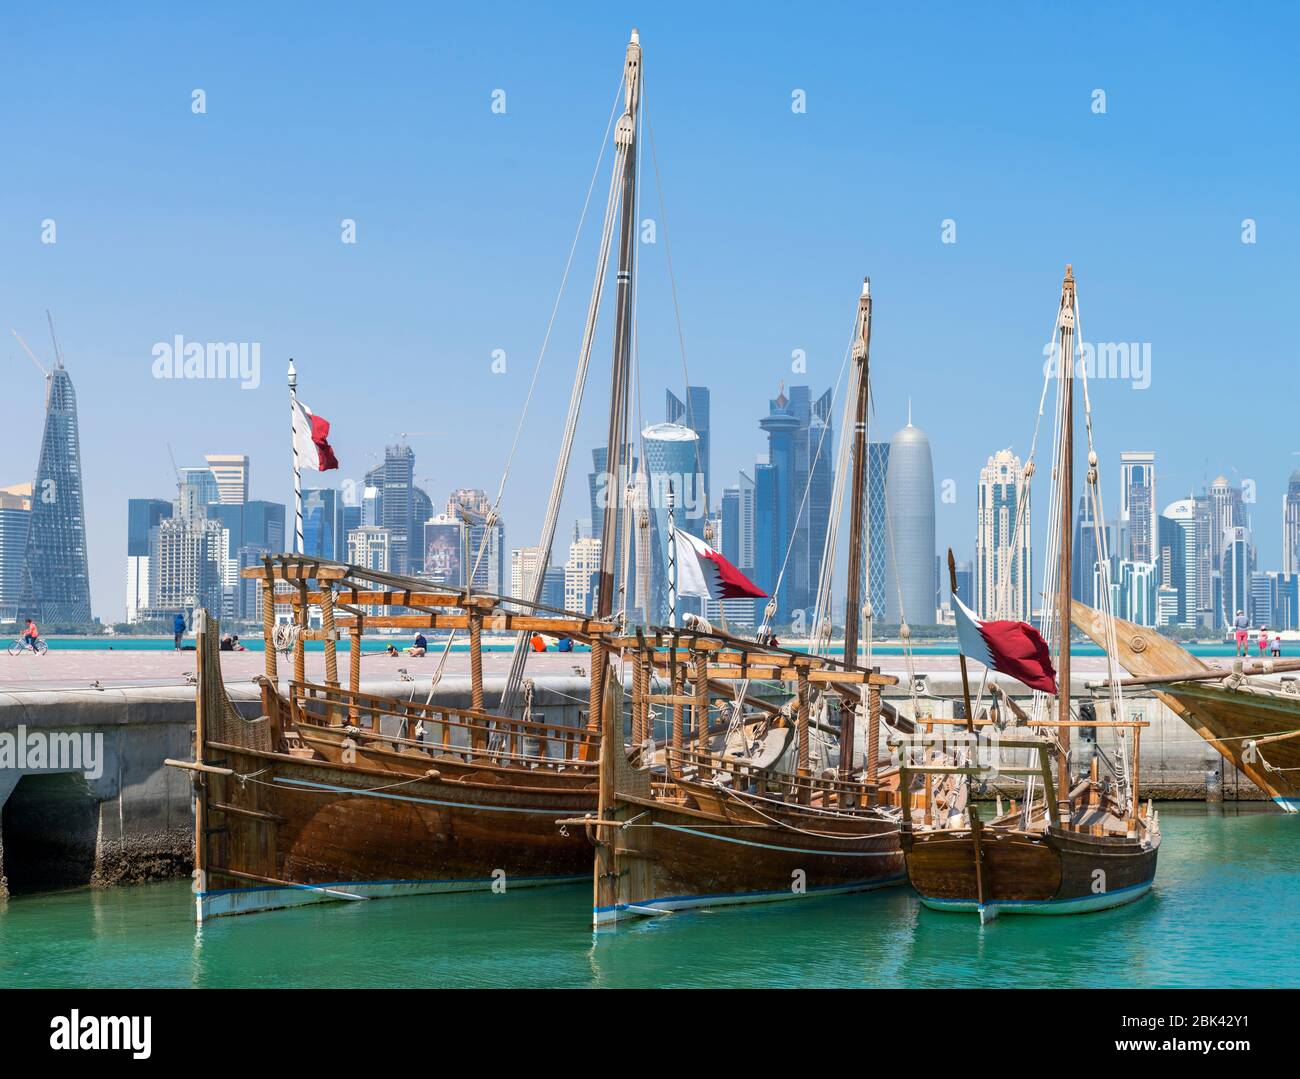 Dhows in the Dhow Harbourwith the West Bay Central Business District skyline behind, Doha, Qatar, Middle East Stock Photo